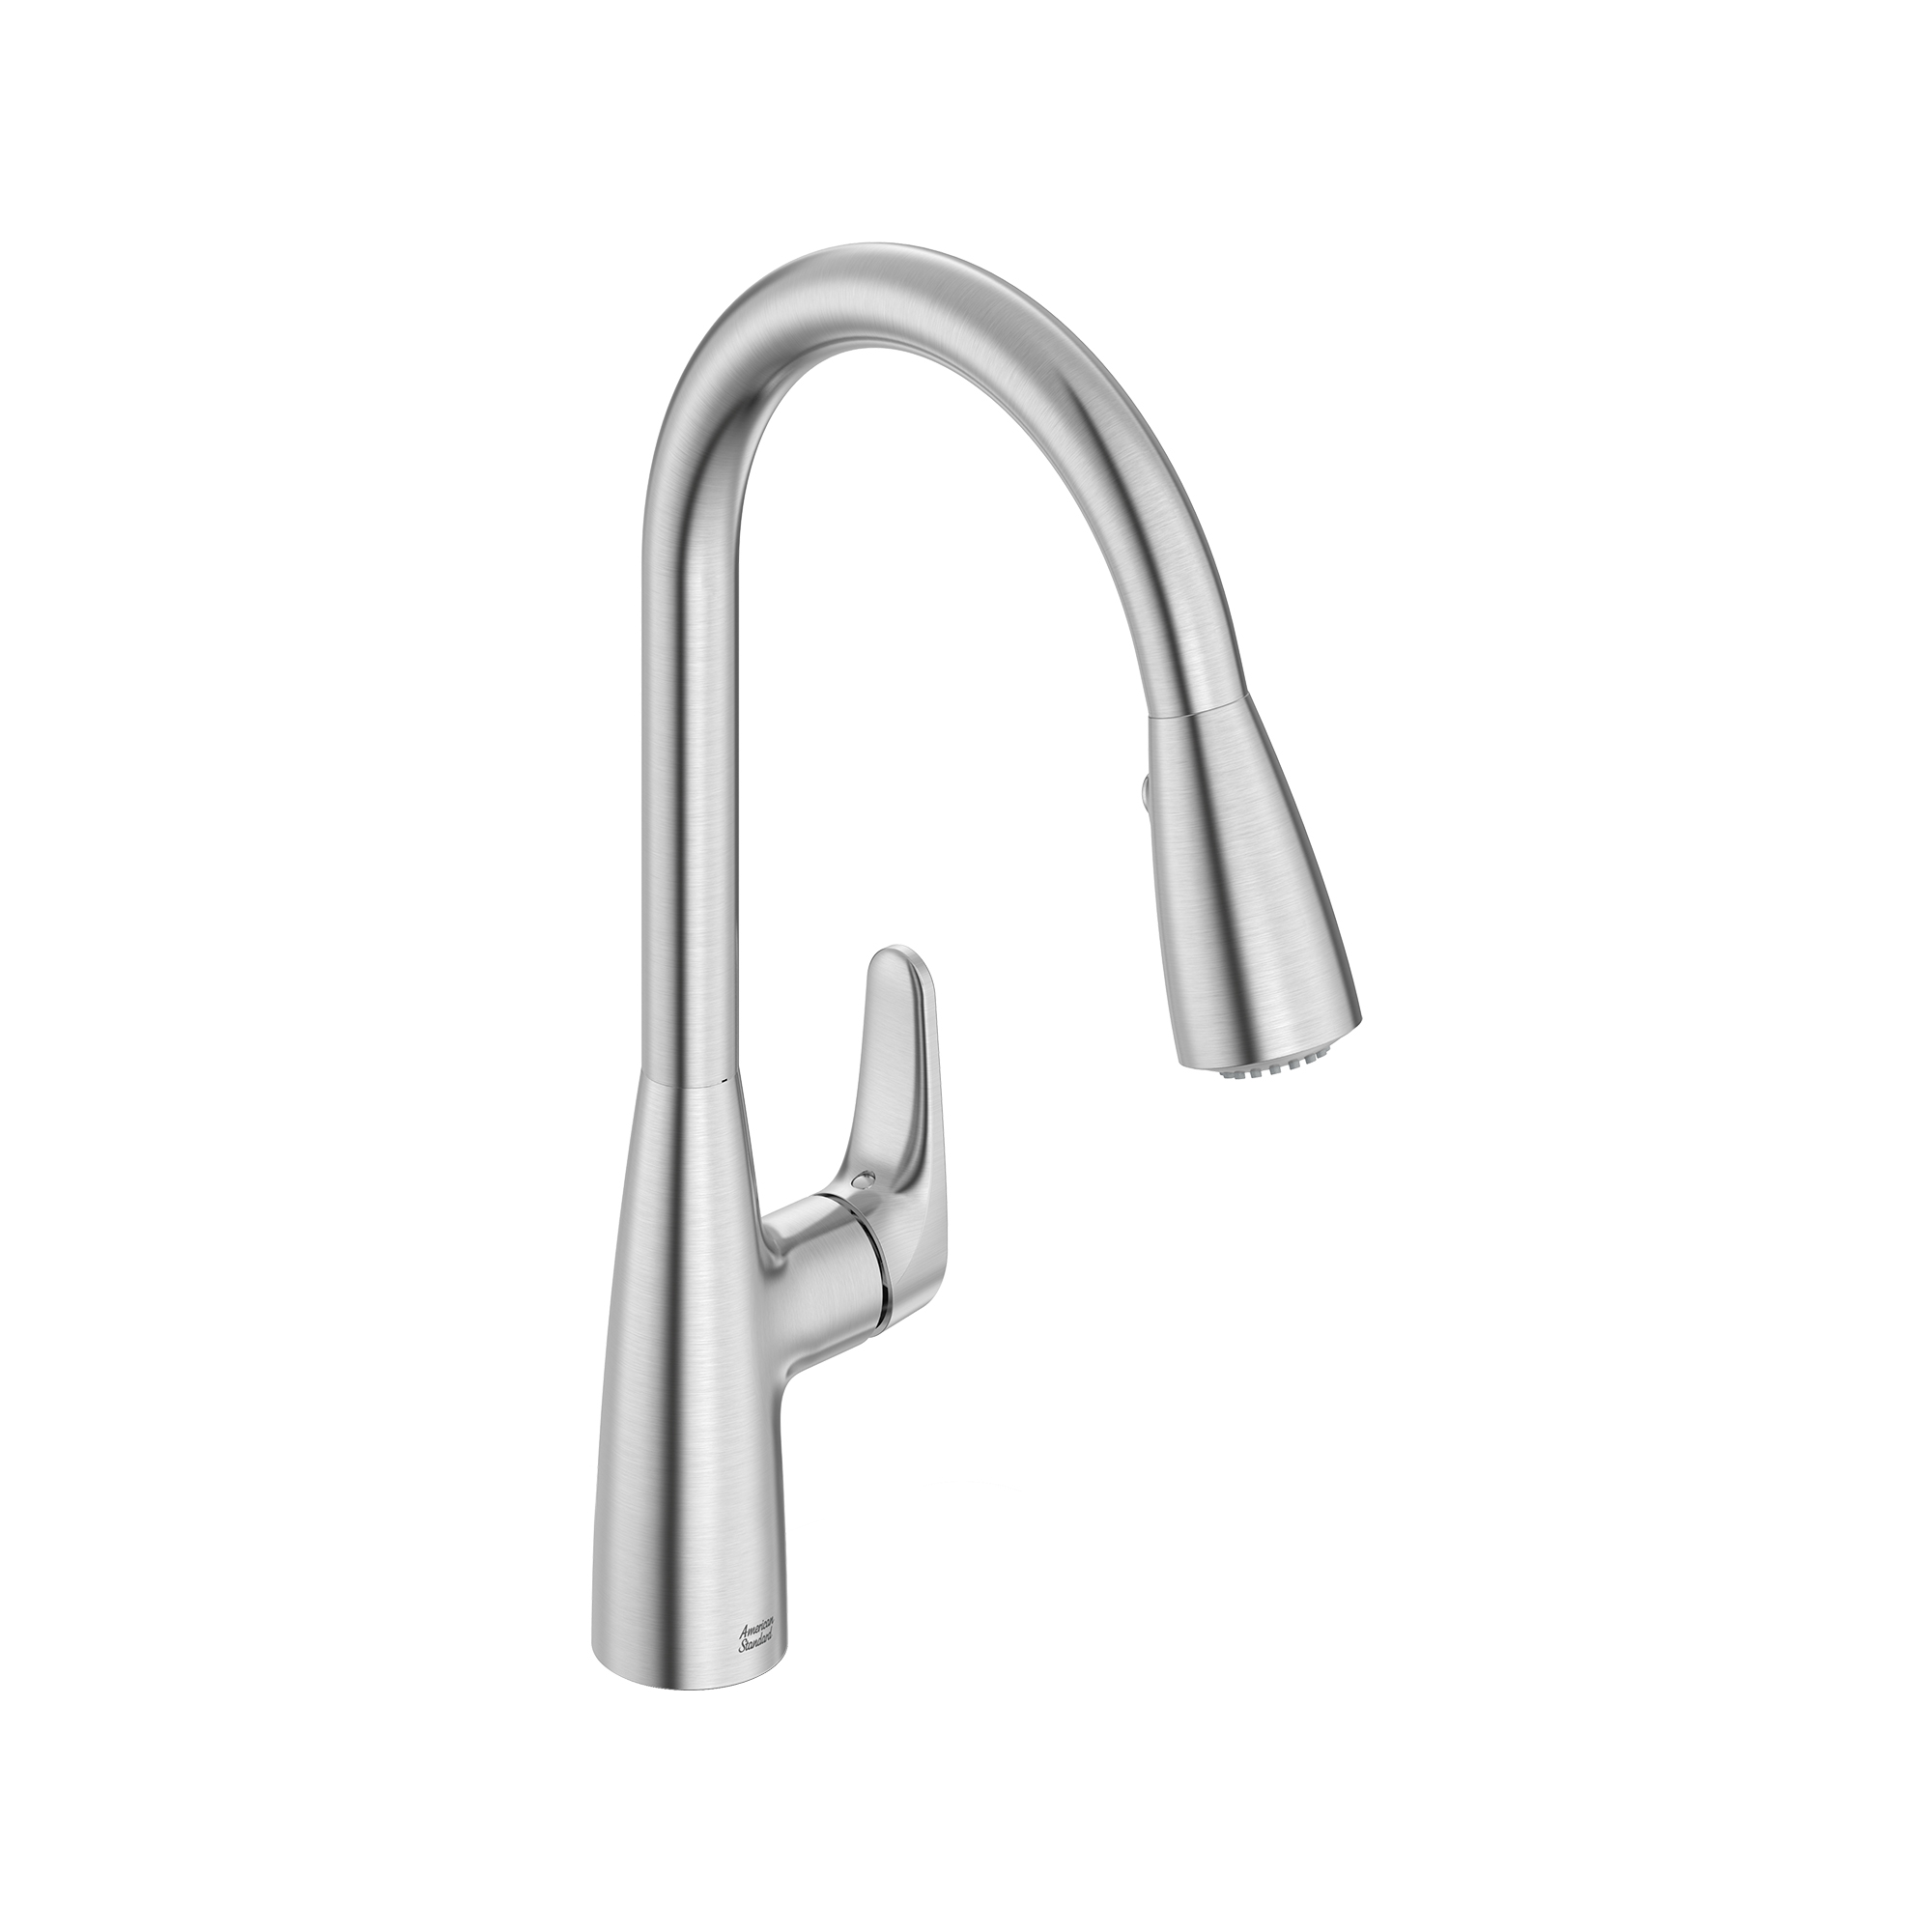 Colony® PRO Single-Handle Pull-Down Dual Spray Kitchen Faucet 1.5 gpm/5.7 L/min